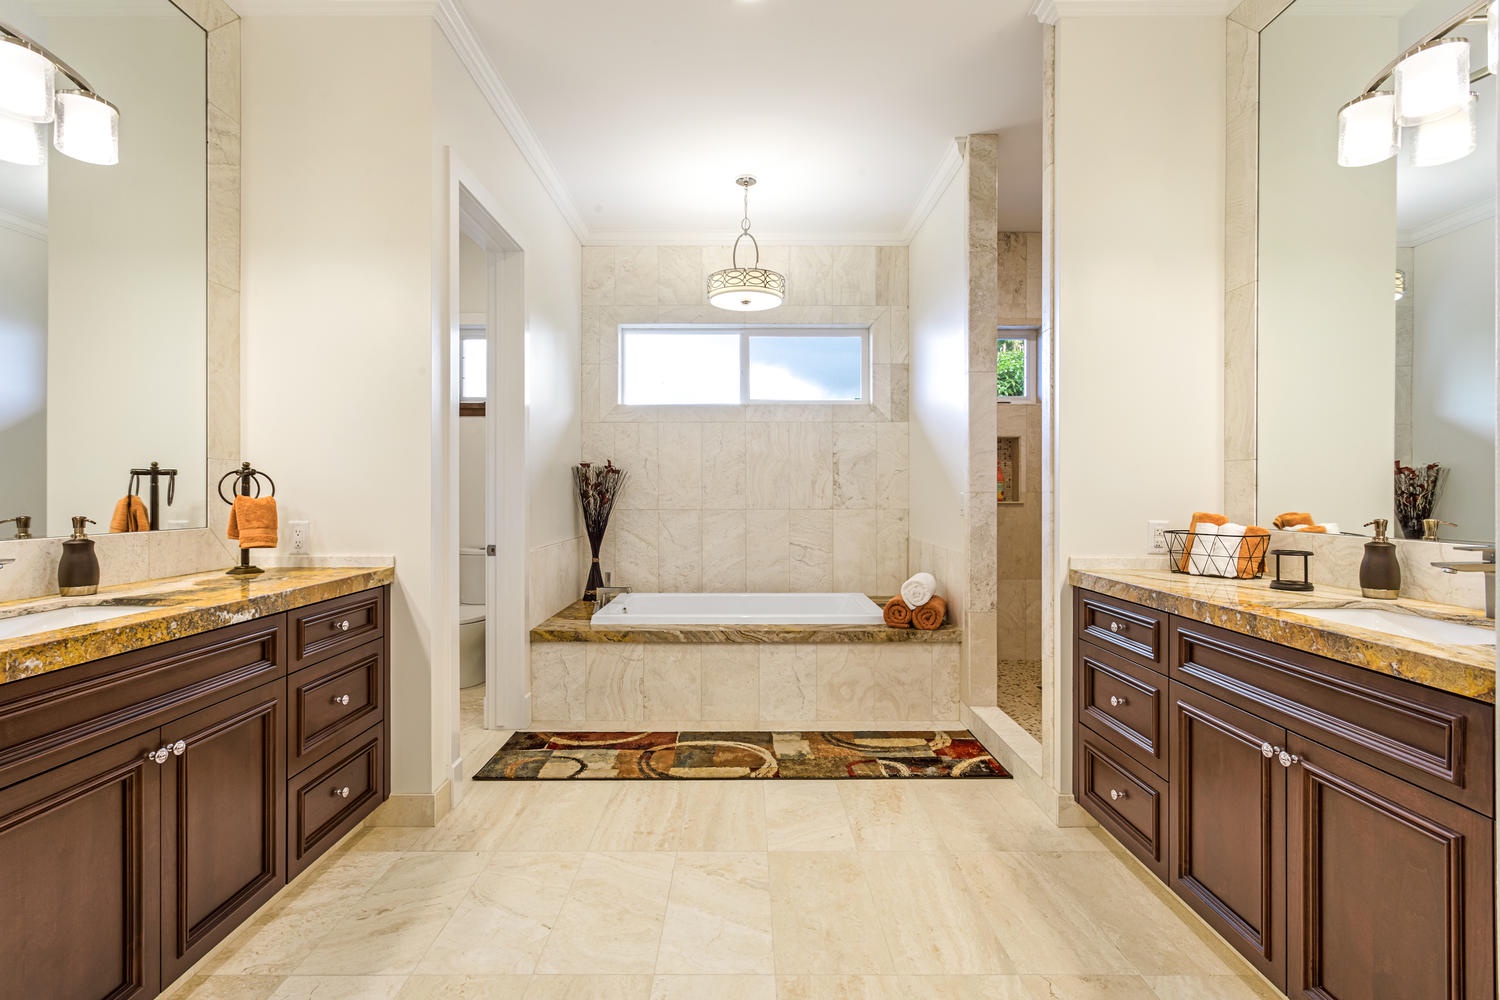 Kailua Kona Vacation Rentals, Ohana le'ale'a - en suite bath with a soaking tub, two walk-in showers, a vanity, and dual walk-in closets.